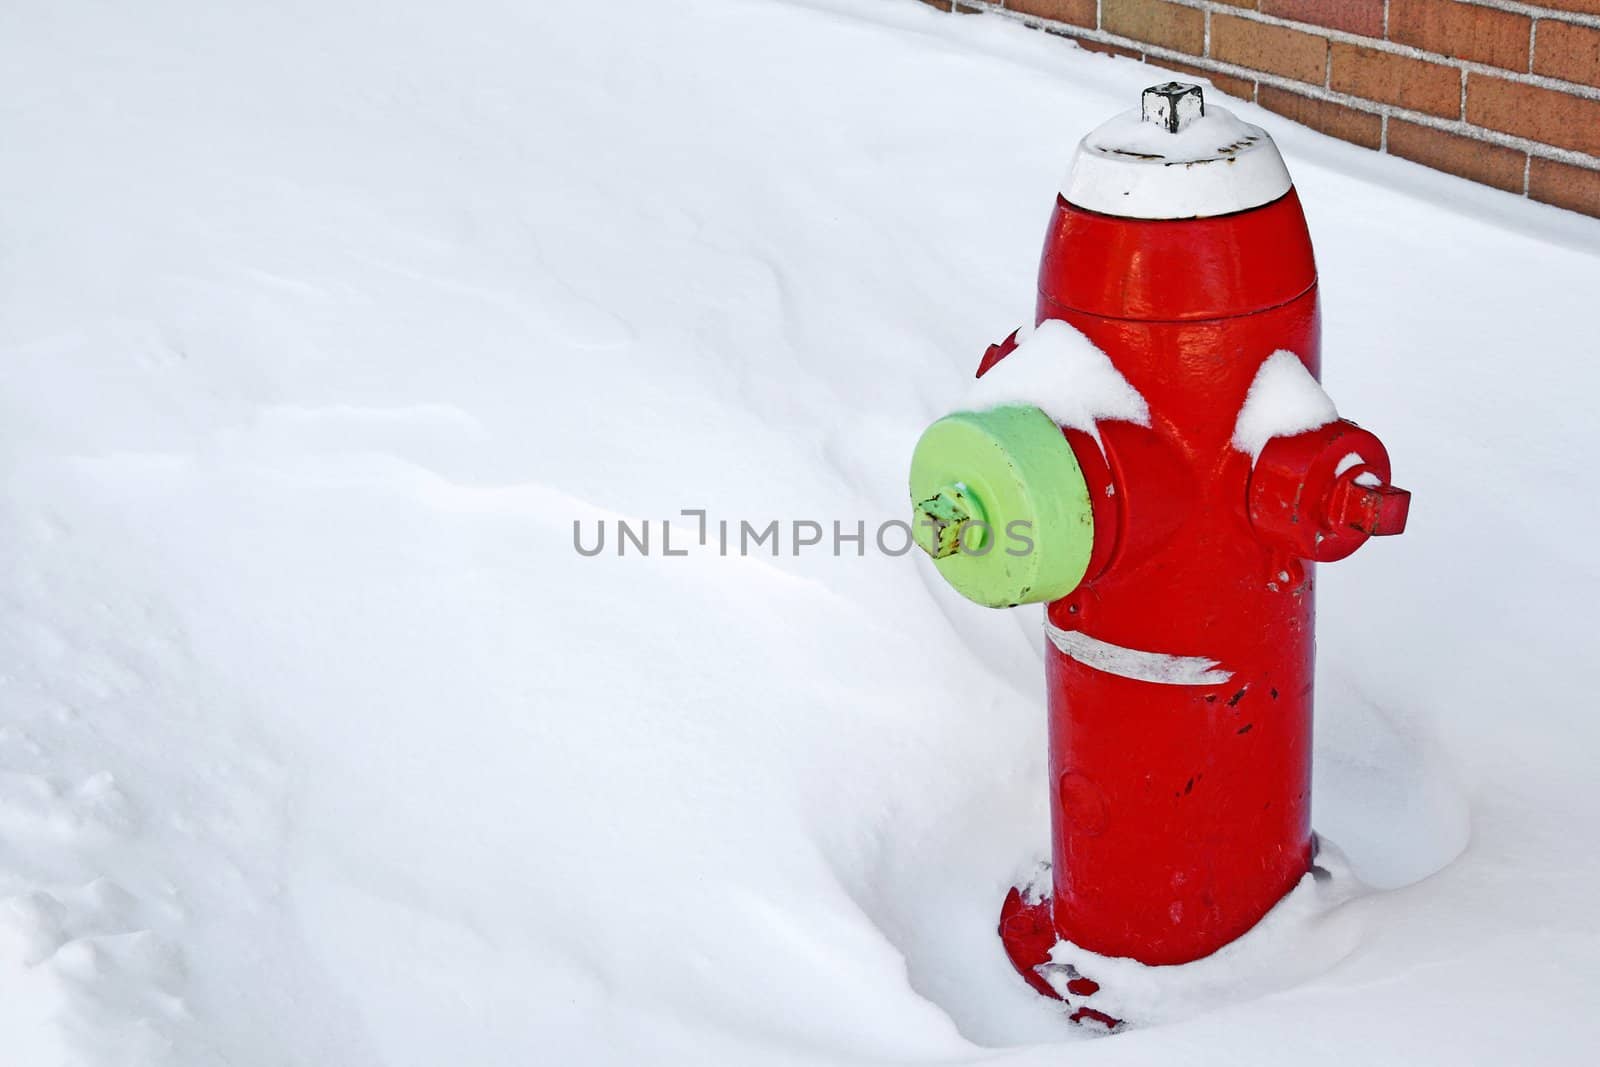 Red fire hydrant on the sidewalk covered by snow.